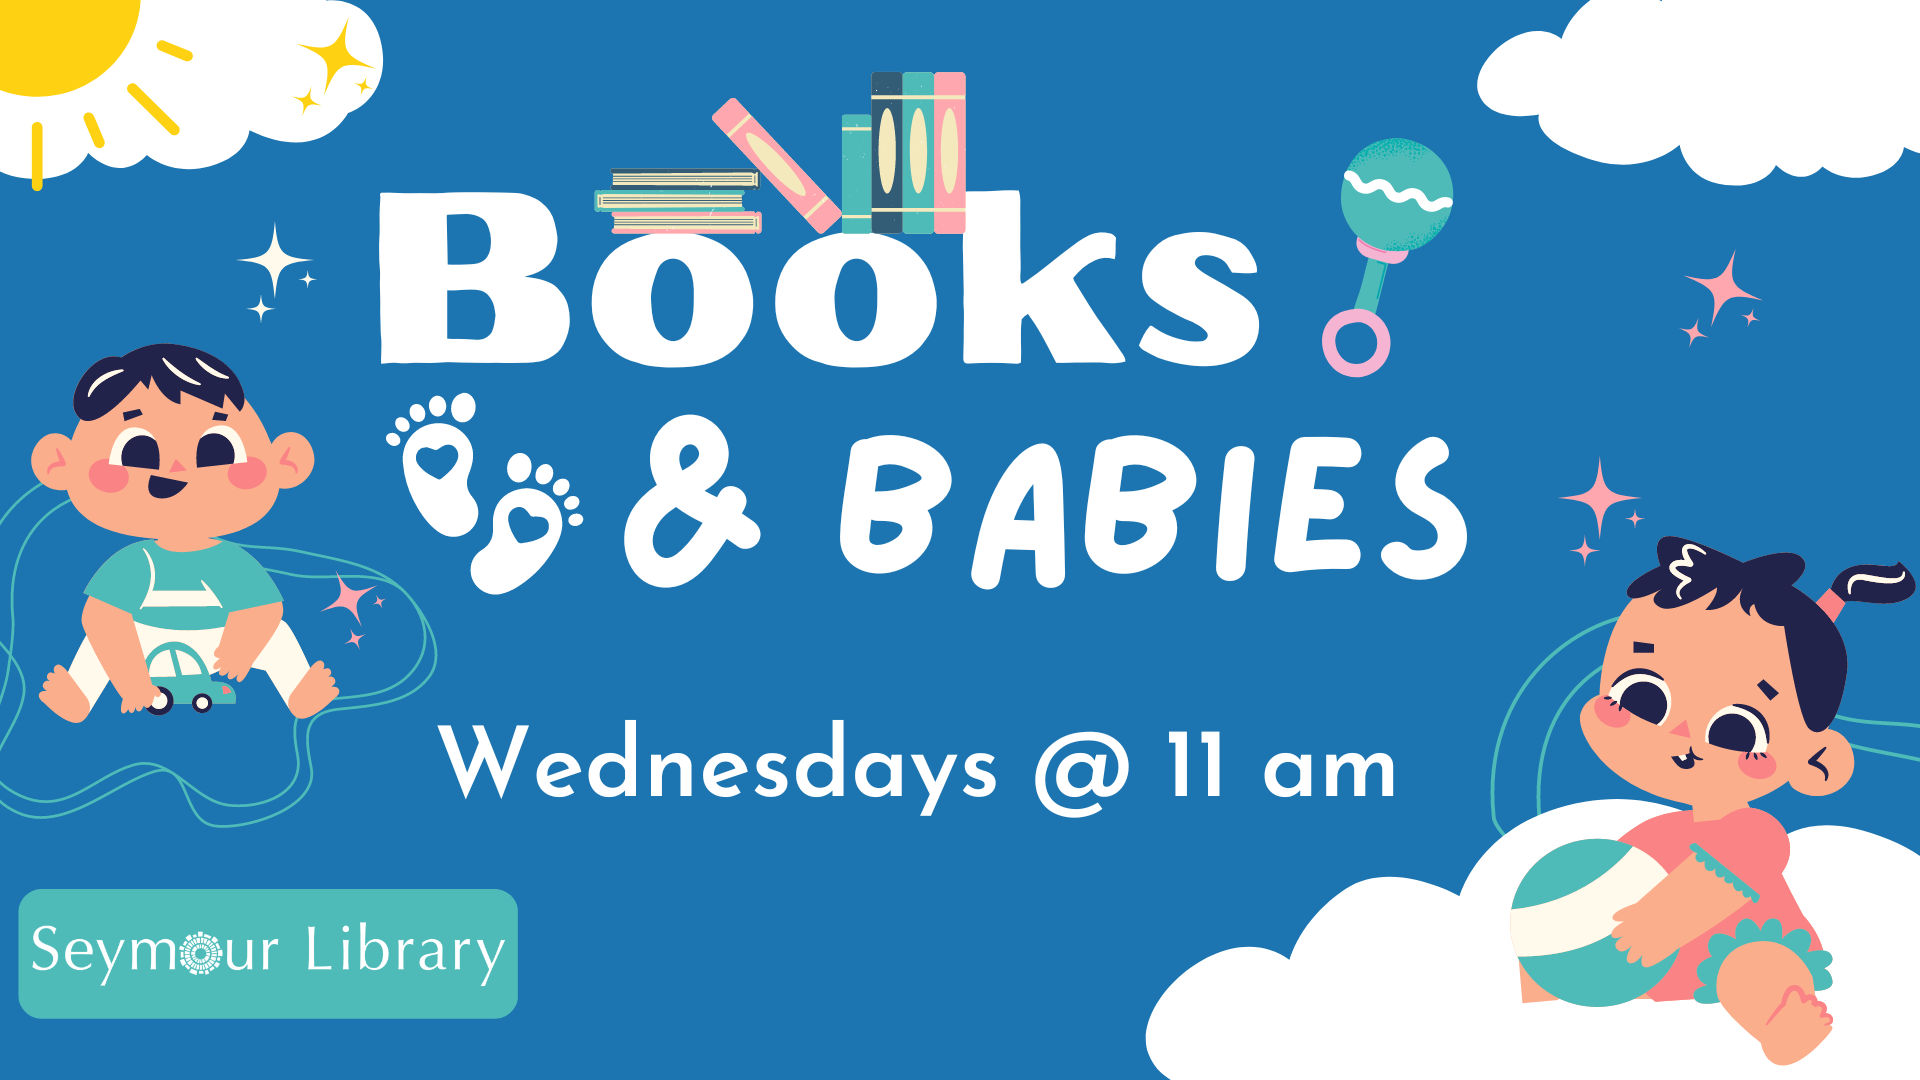 Books and Babies Wednesdays at 11am at Seymour Library - with logo and graphic of babies